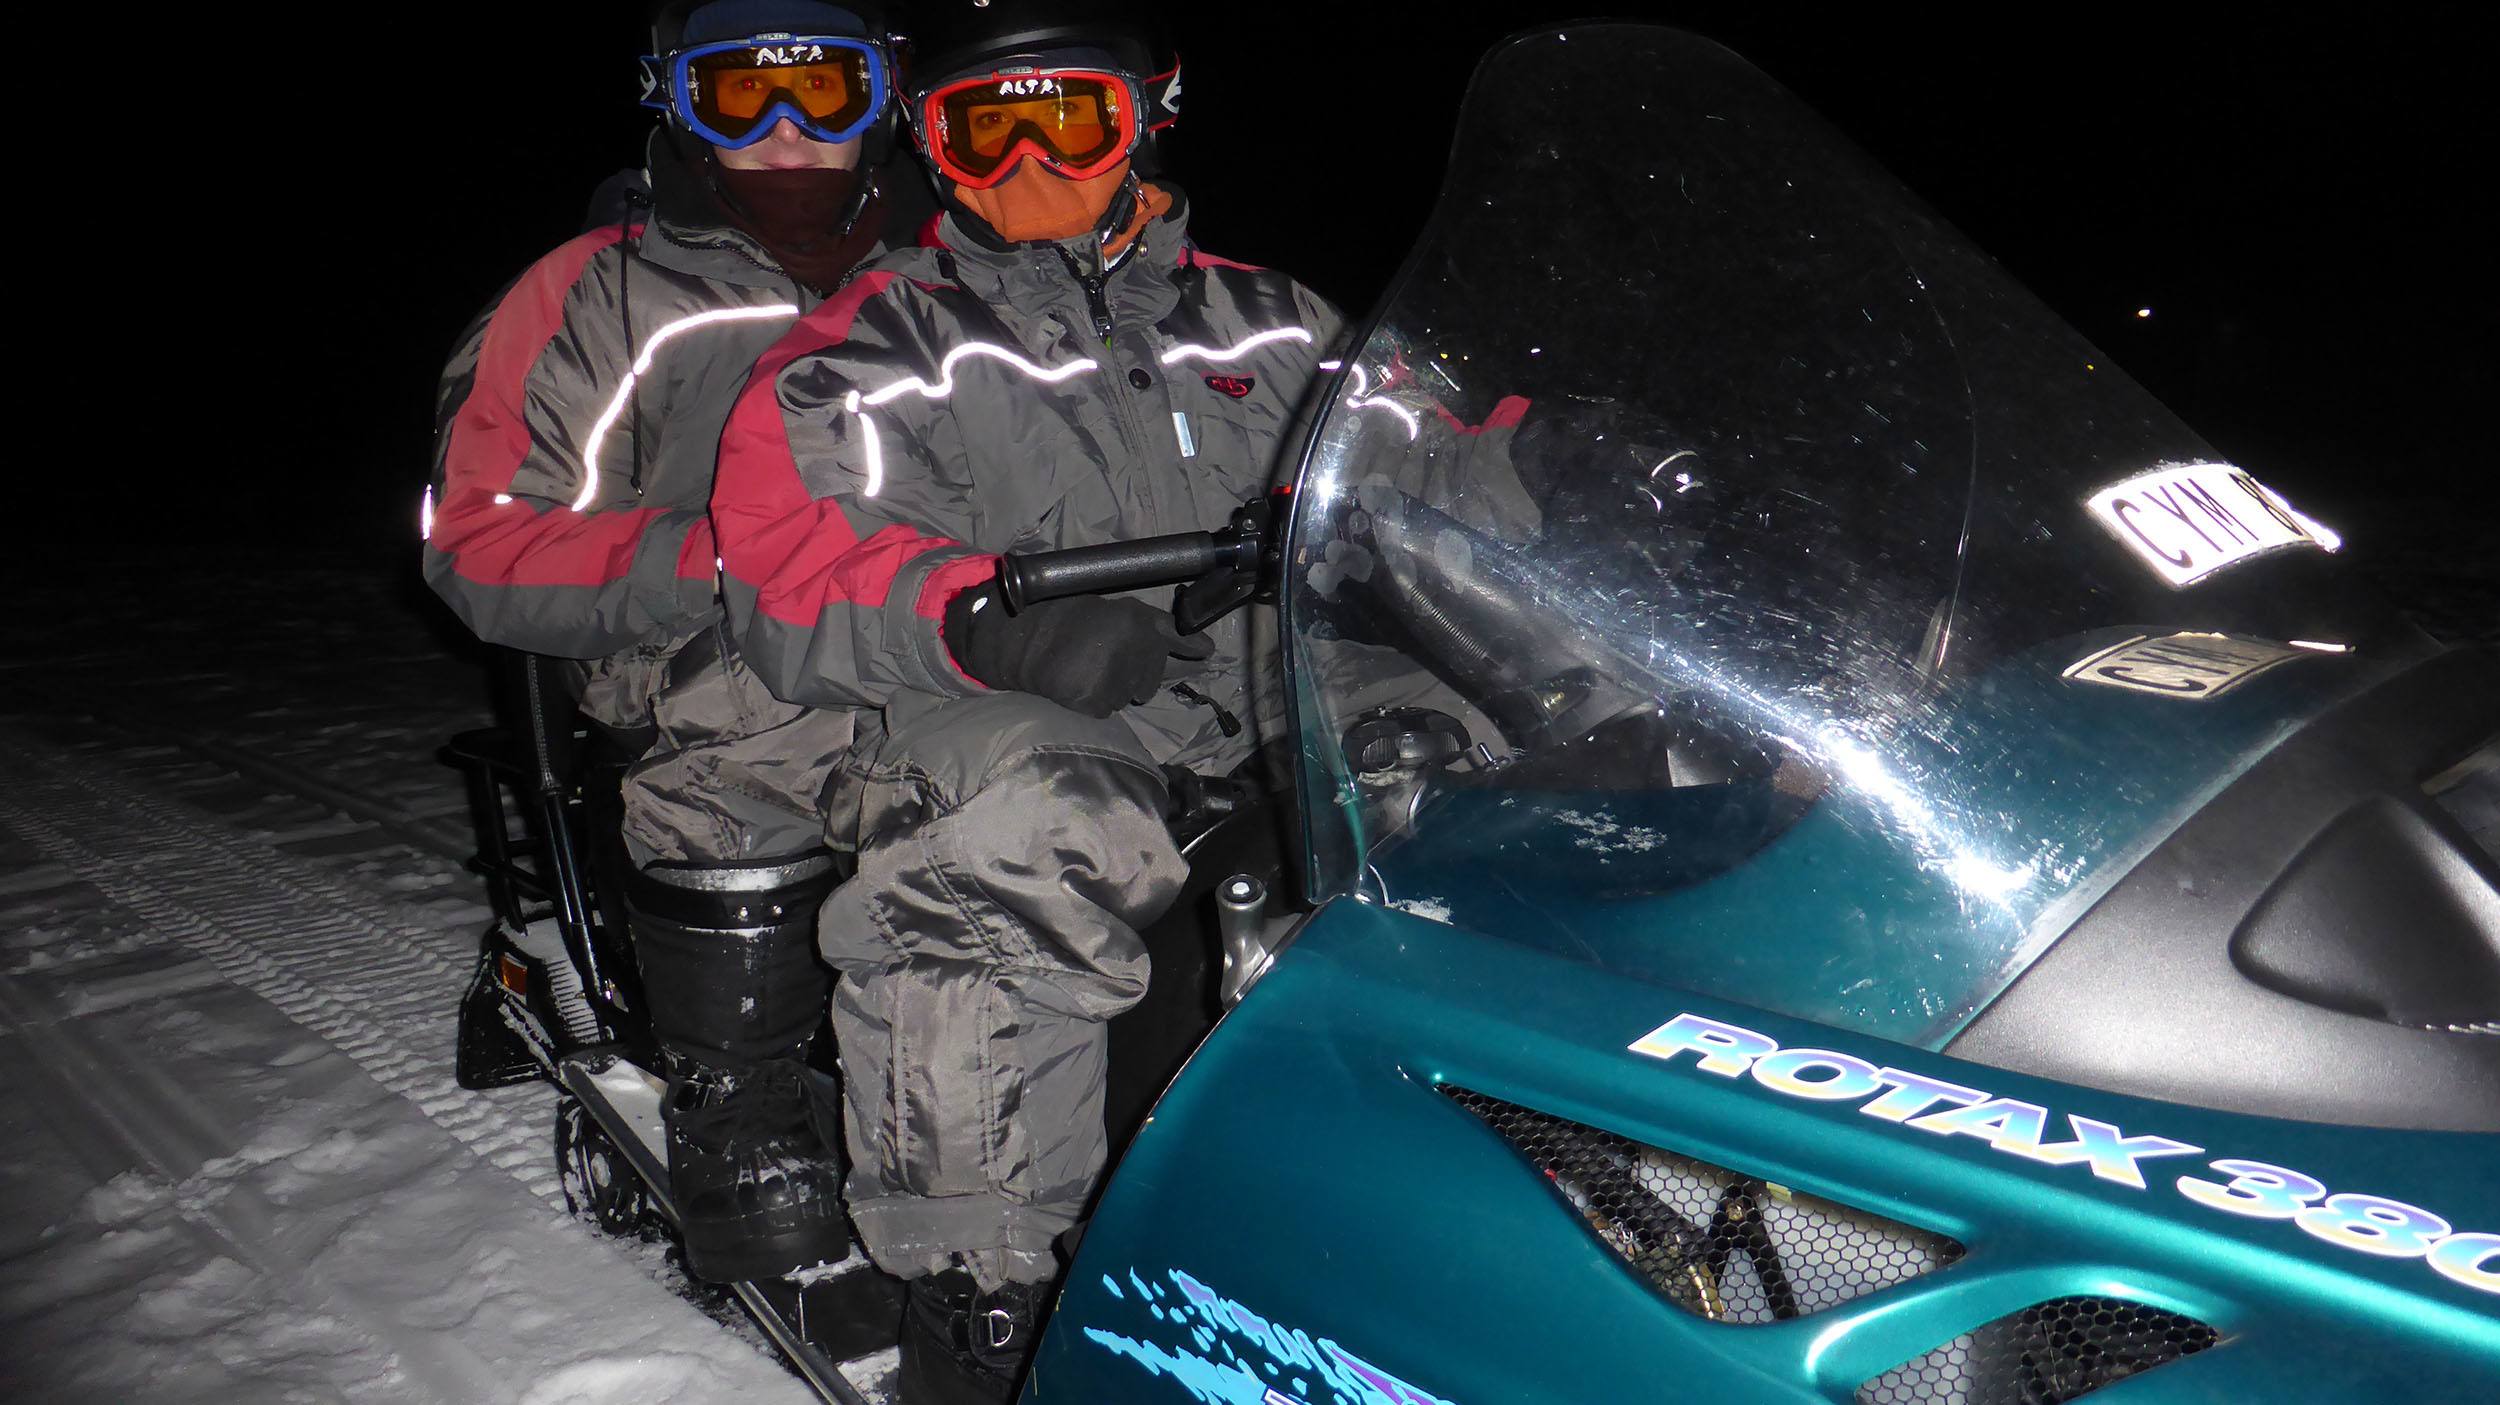 Kylie and Ben on a snowmobile outside the Ice Hotel in Sweden